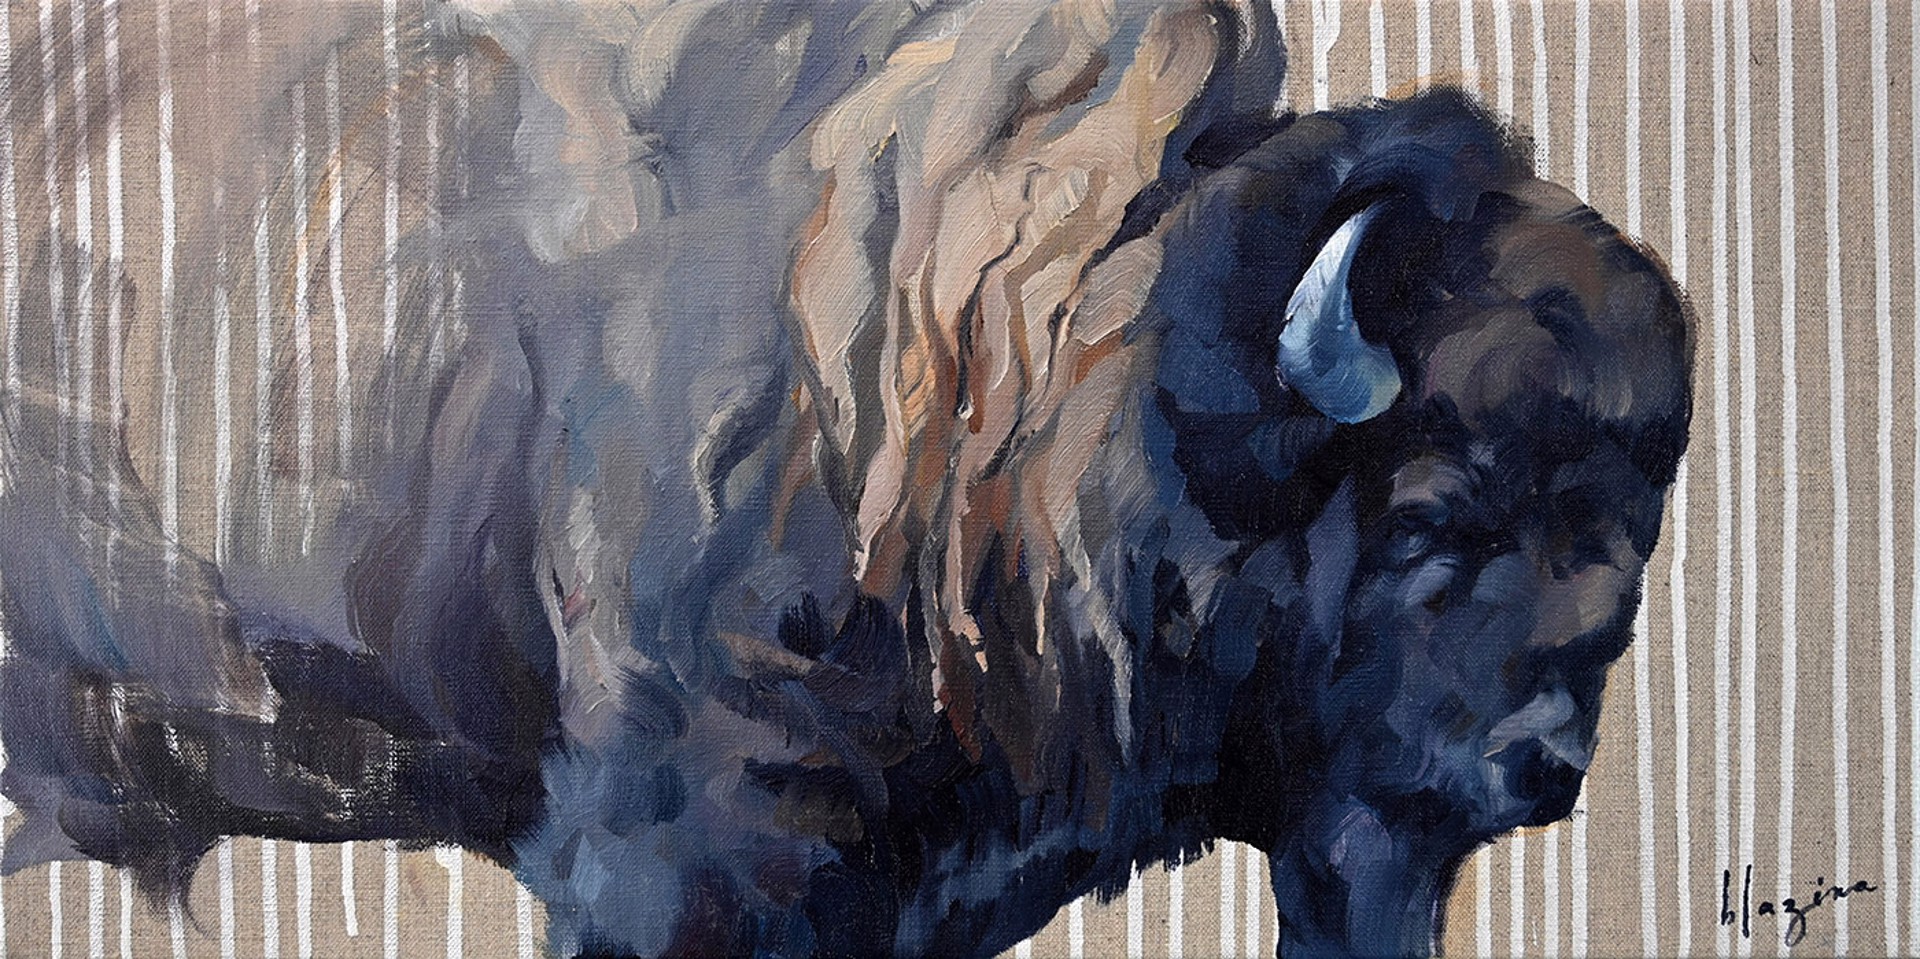 Original Oil Painting By Amber Blazina Featuring A Bison On Exposed Linen